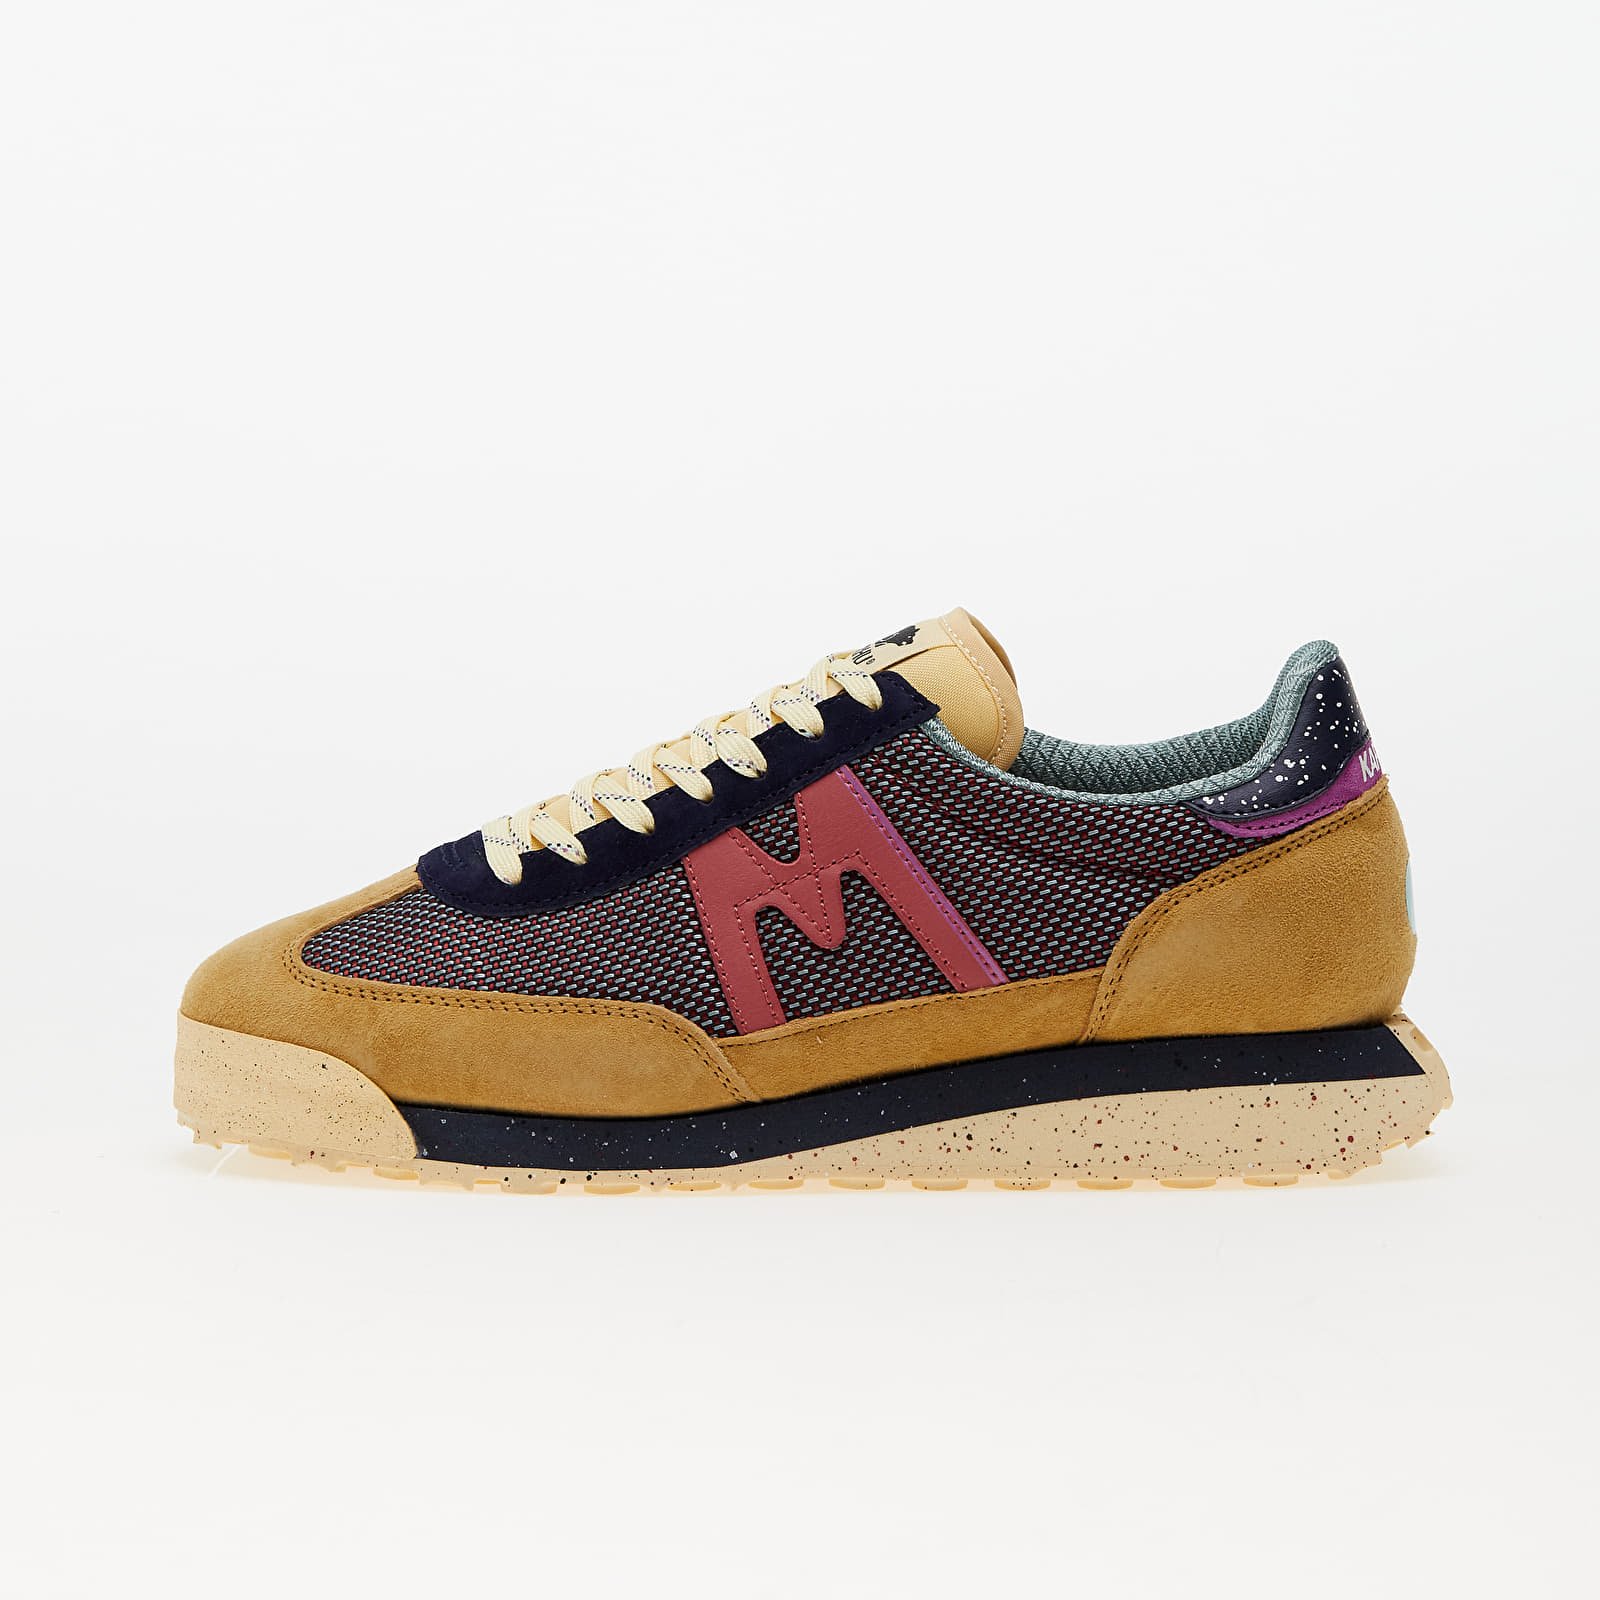 Men's shoes Karhu Mestari Control Curry/ Mineral Red